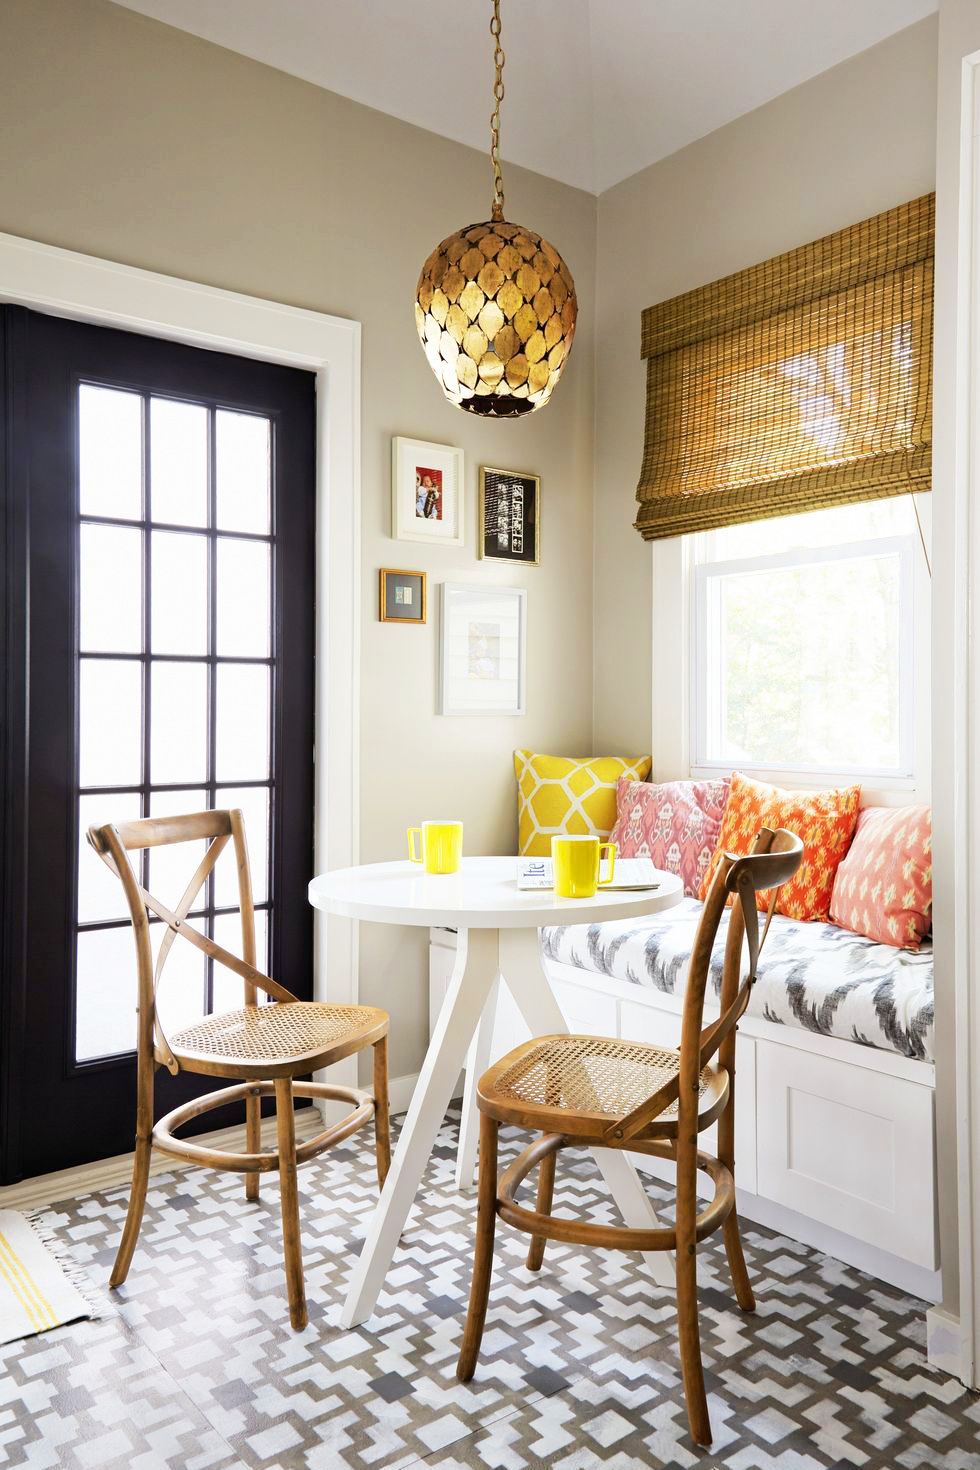 15 Small Dining Room Ideas - How to Decorate Your Small Dining Room